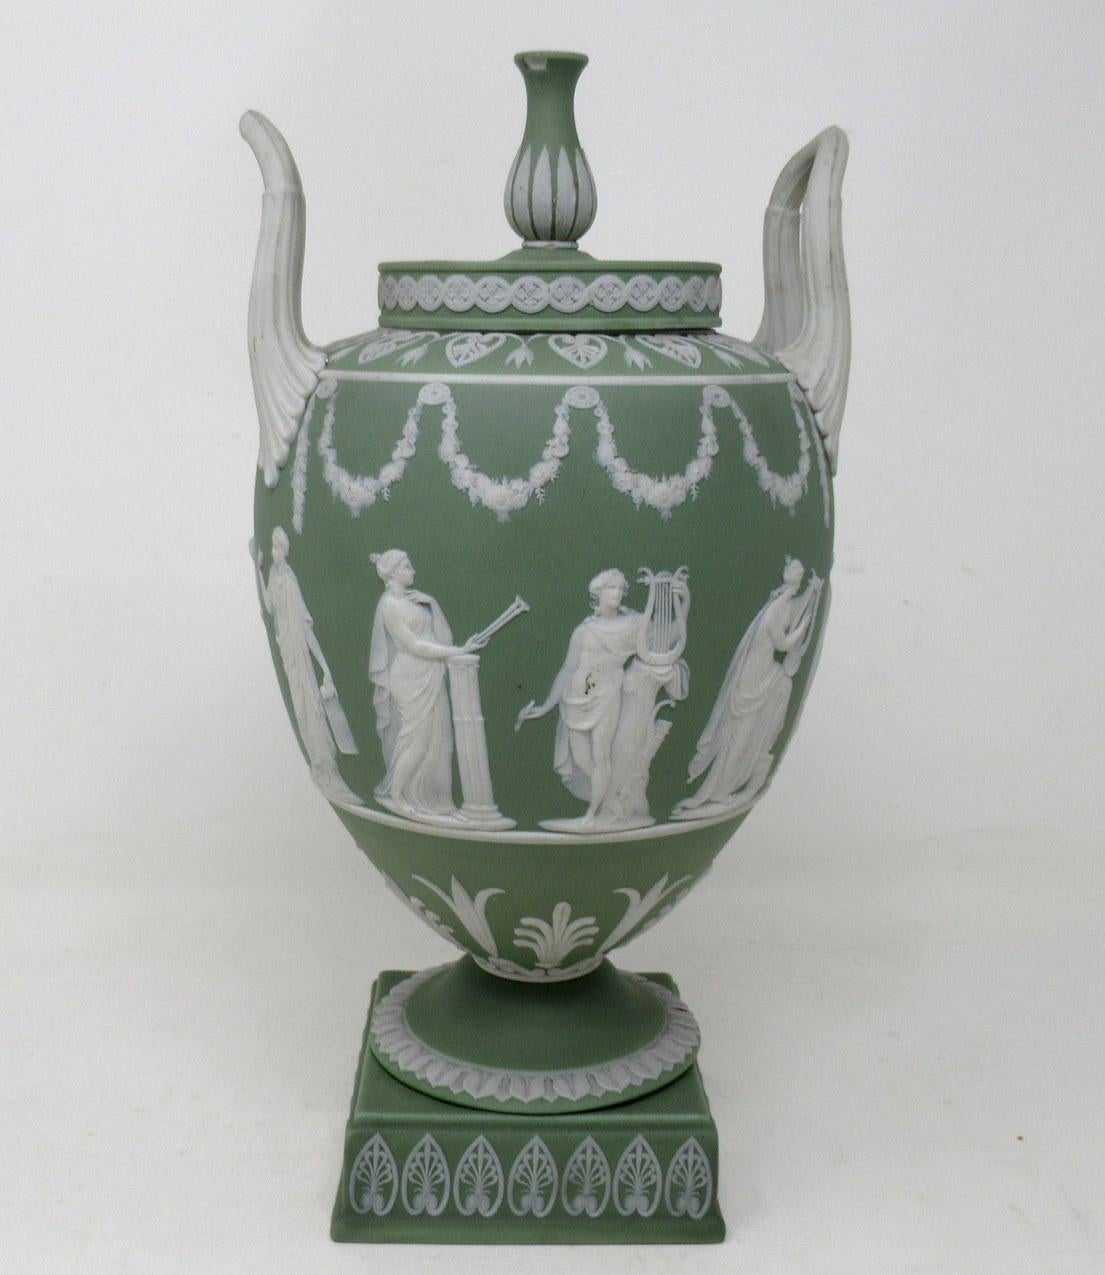 An Exquisite and quite rare English Staffordshire Wedgwood Jasperware sage green ground Vase of Amphora outline and generous proportions, after an earlier model by John Flaxman Junior. Third quarter of the Nineteenth Century. 

The arch ovoid body